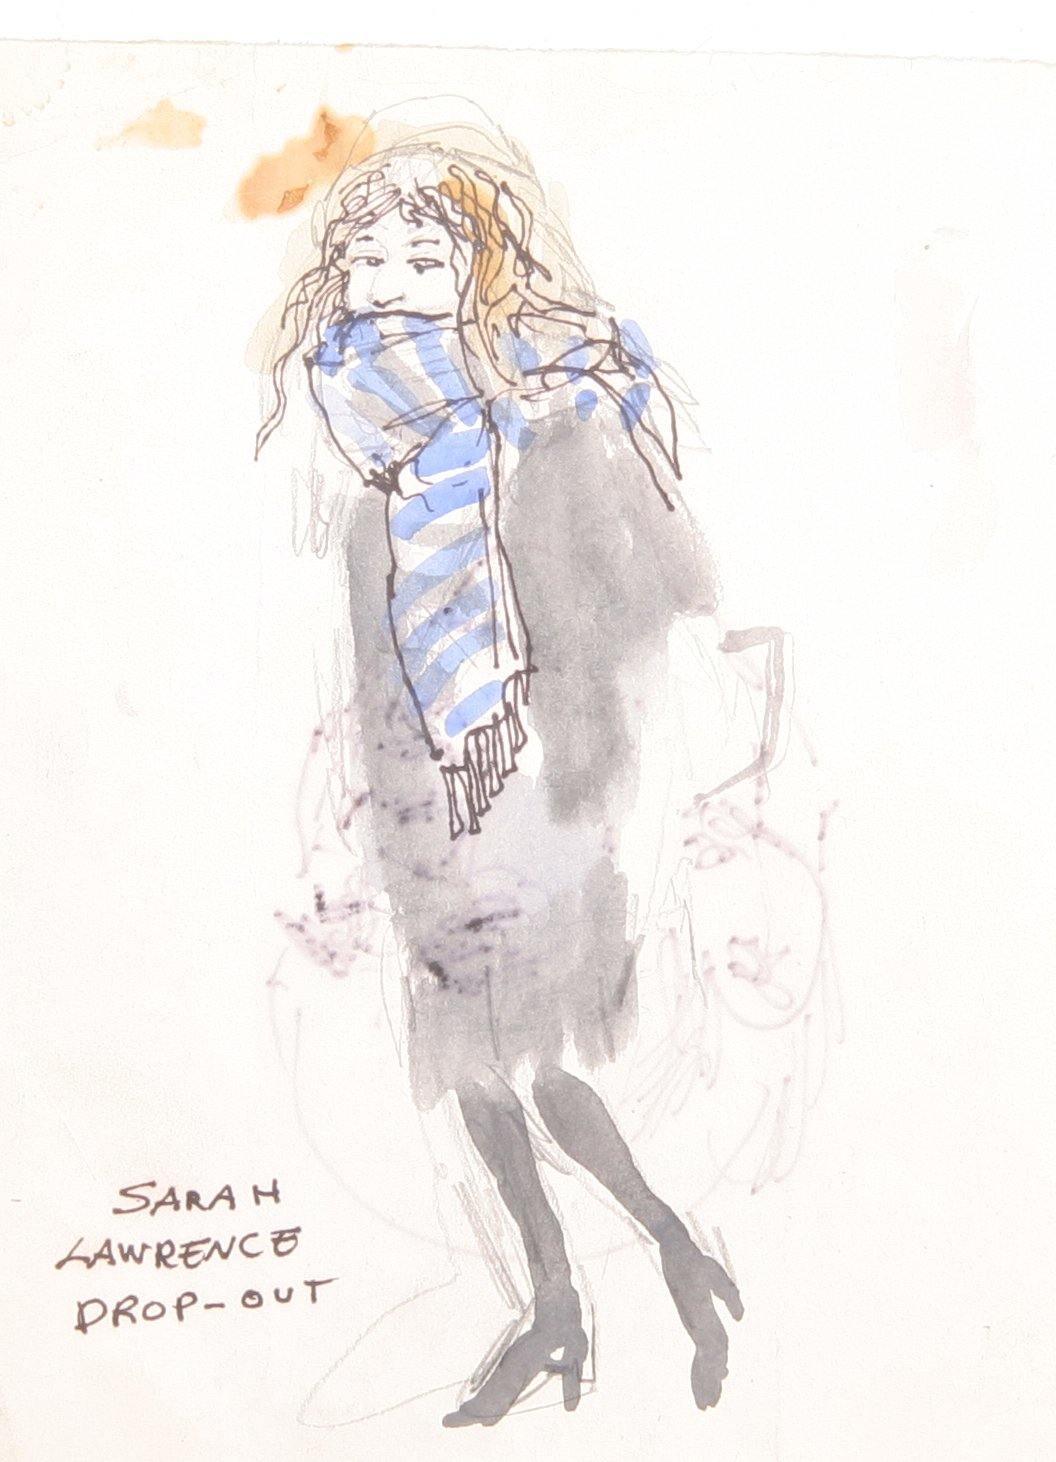 Sarah Lawrence Drop-Out Watercolor | Marshall Goodman,{{product.type}}